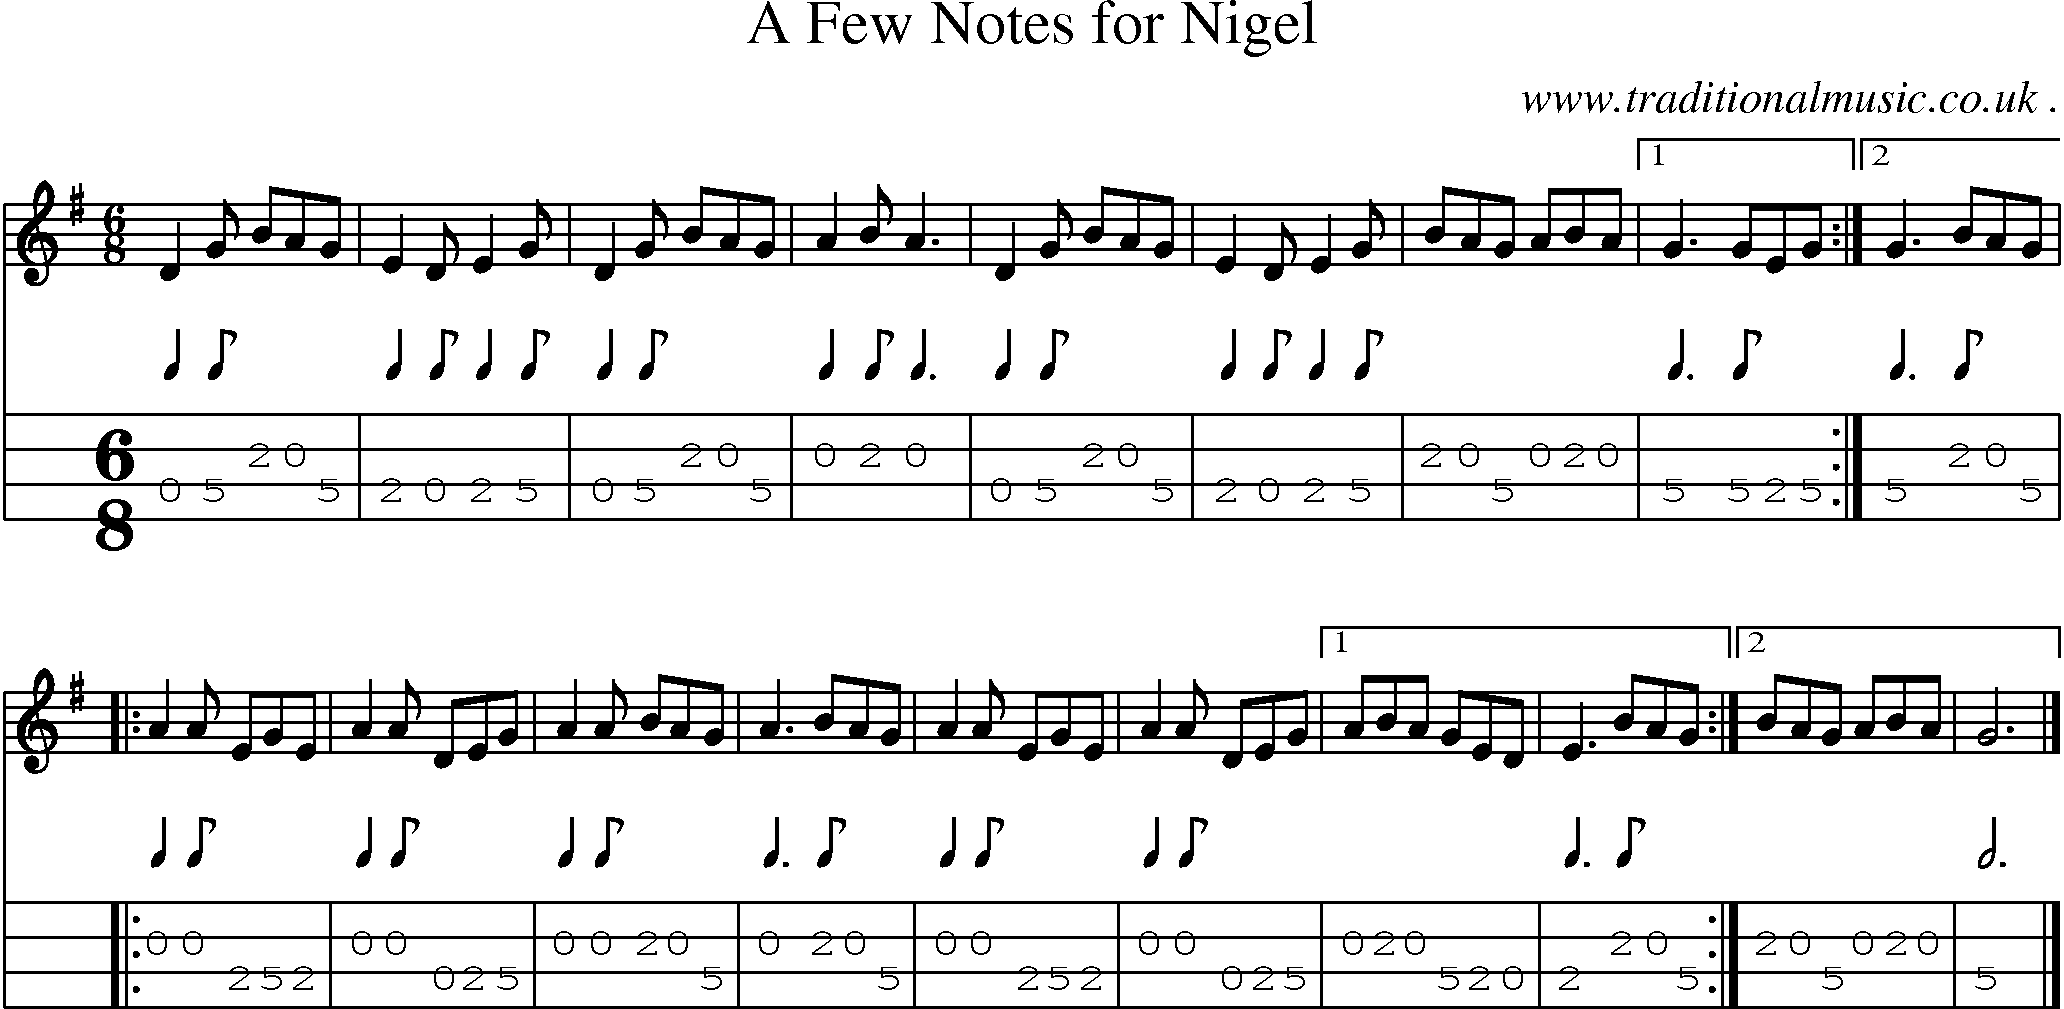 Sheet-music  score, Chords and Mandolin Tabs for A Few Notes For Nigel